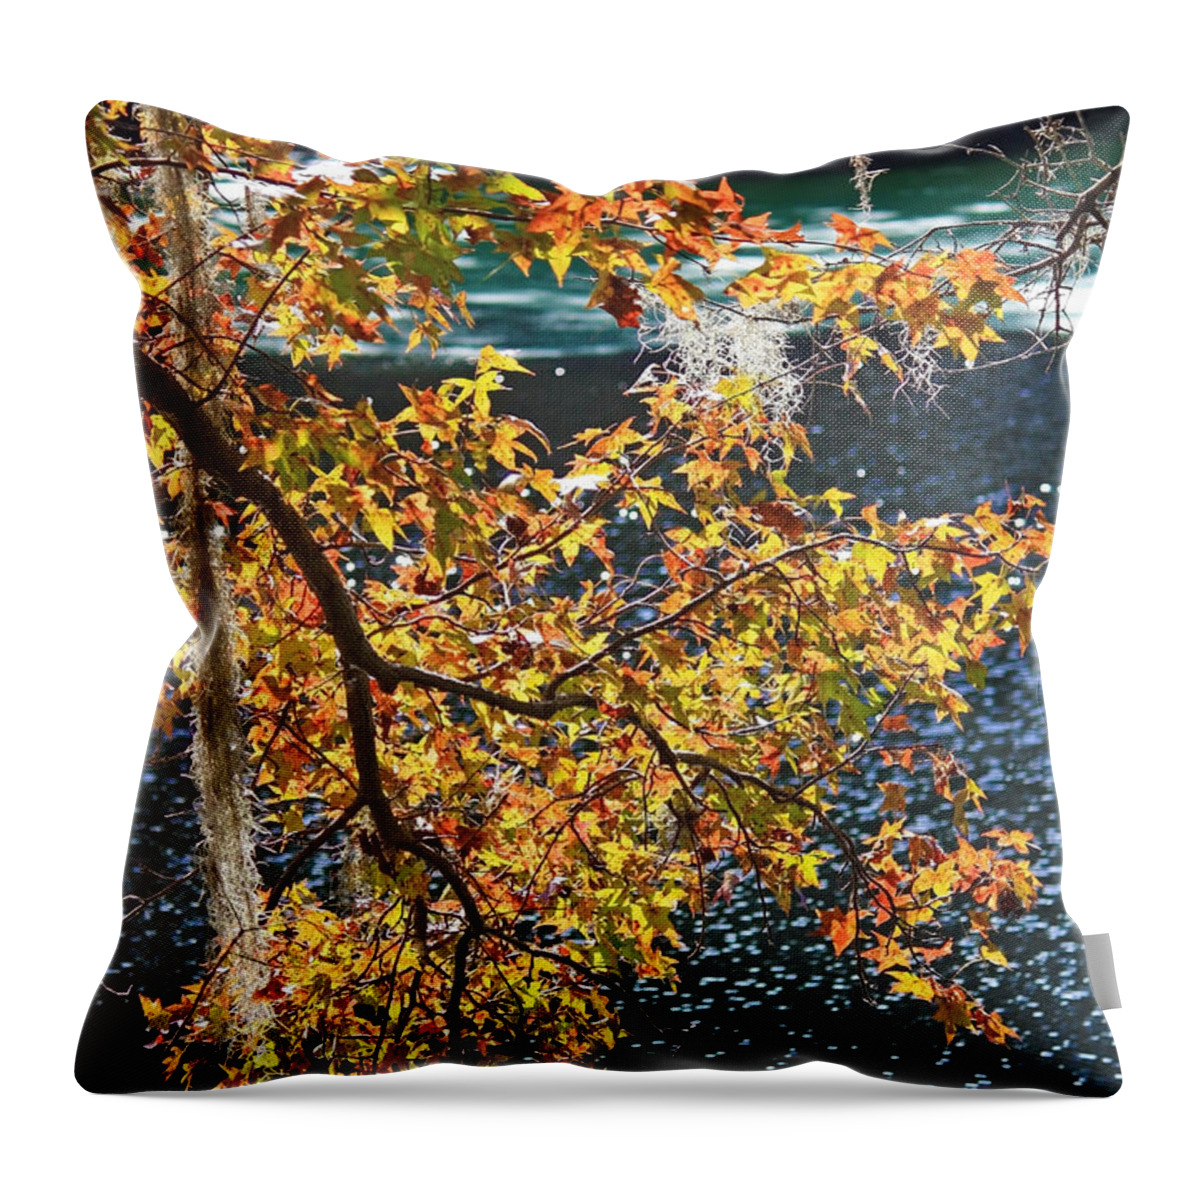 Fall Leaves Throw Pillow featuring the photograph Colorful Fall Leaves over Blue Water by Carol Groenen